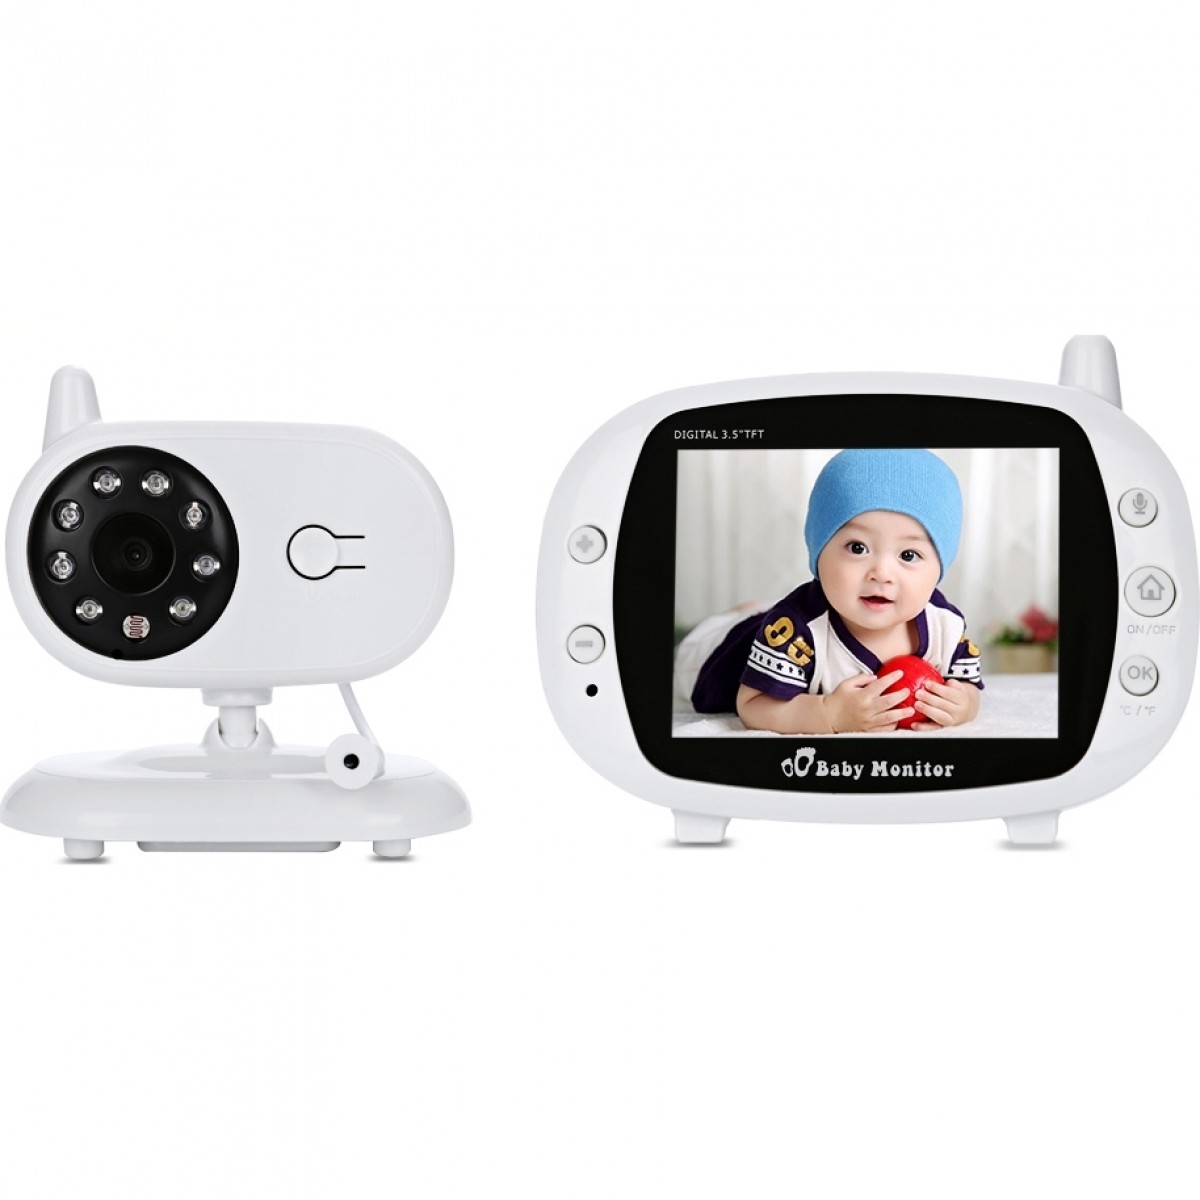 3.5 inch Wireless TFT LCD Video Baby Monitor with Night Vision K32 6511